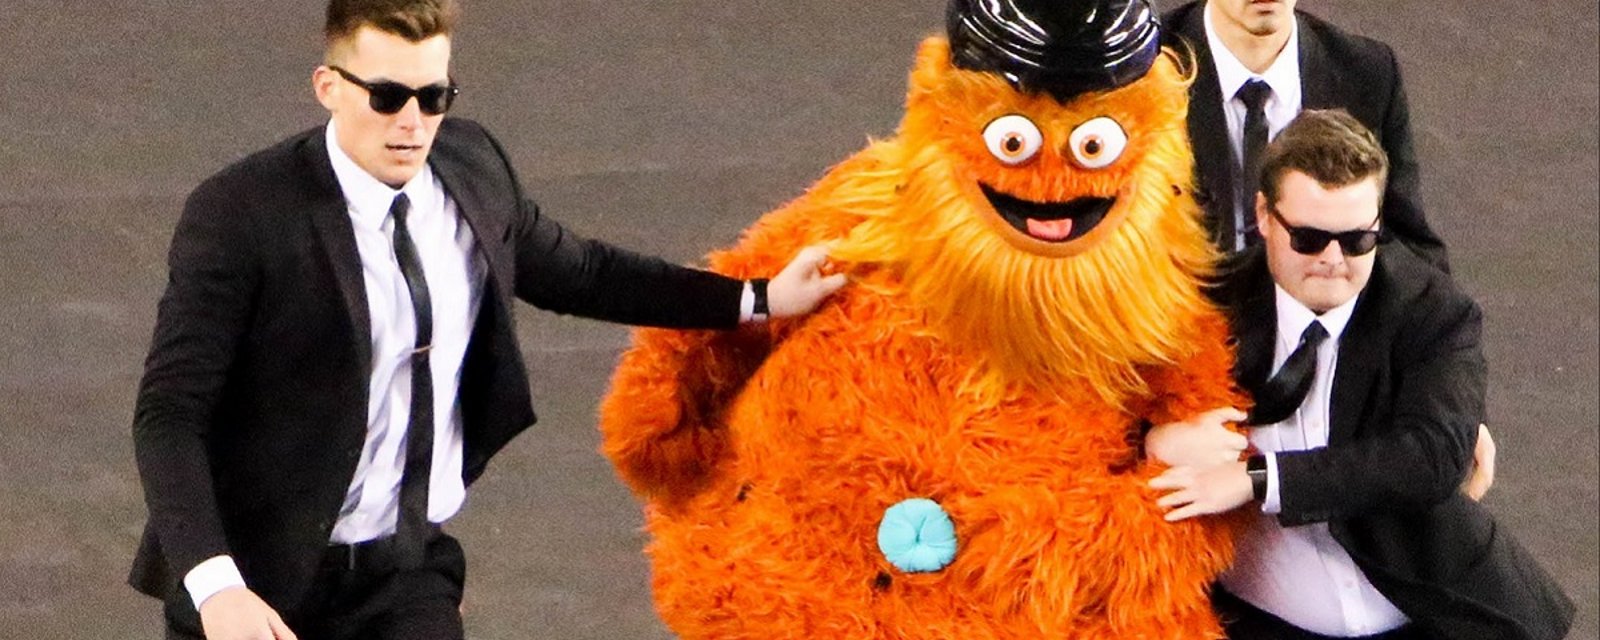 Chaos in Philadelphia as security tries to apprehend a streaking Gritty!